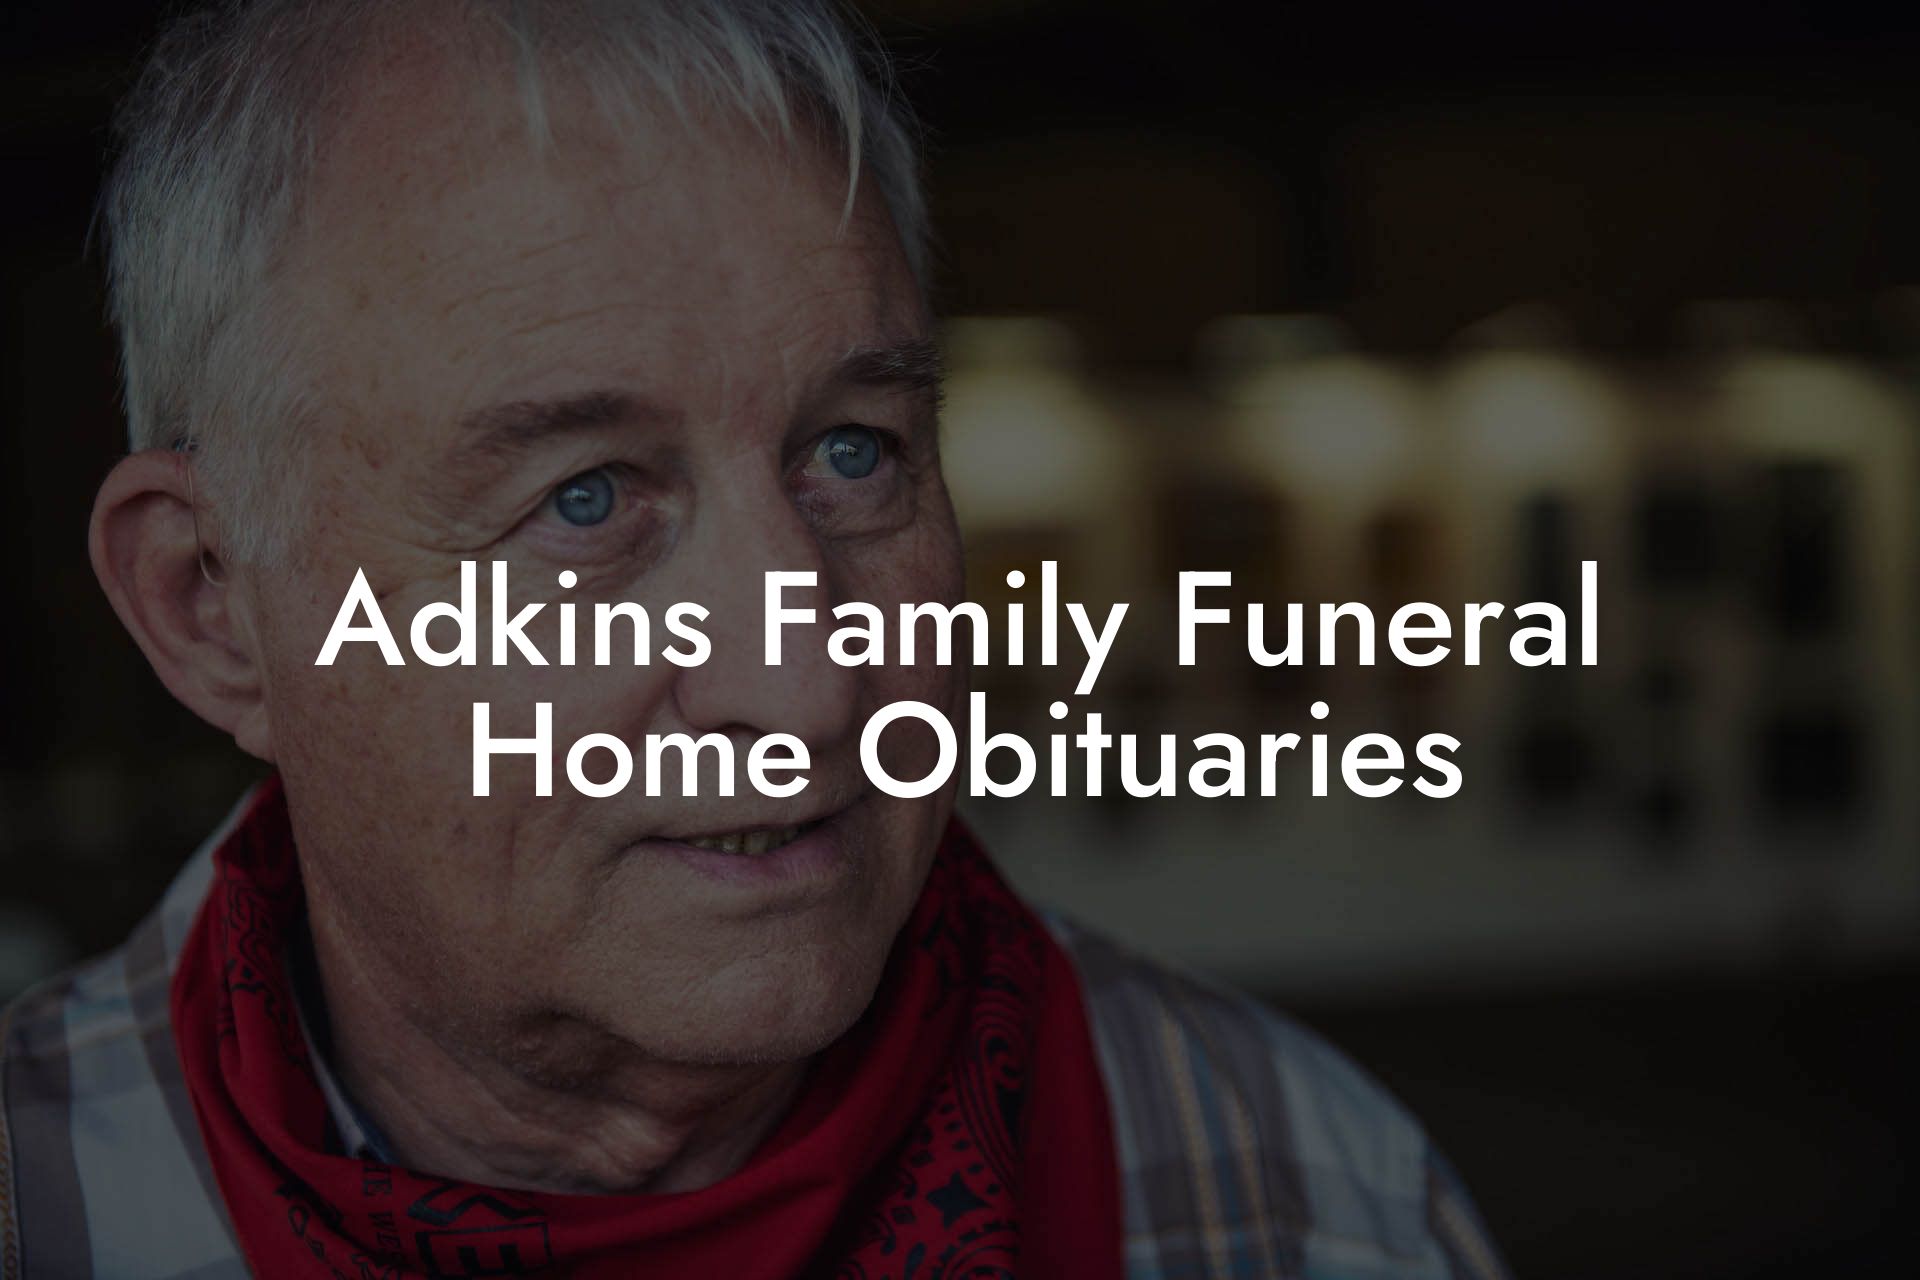 Adkins Family Funeral Home Obituaries